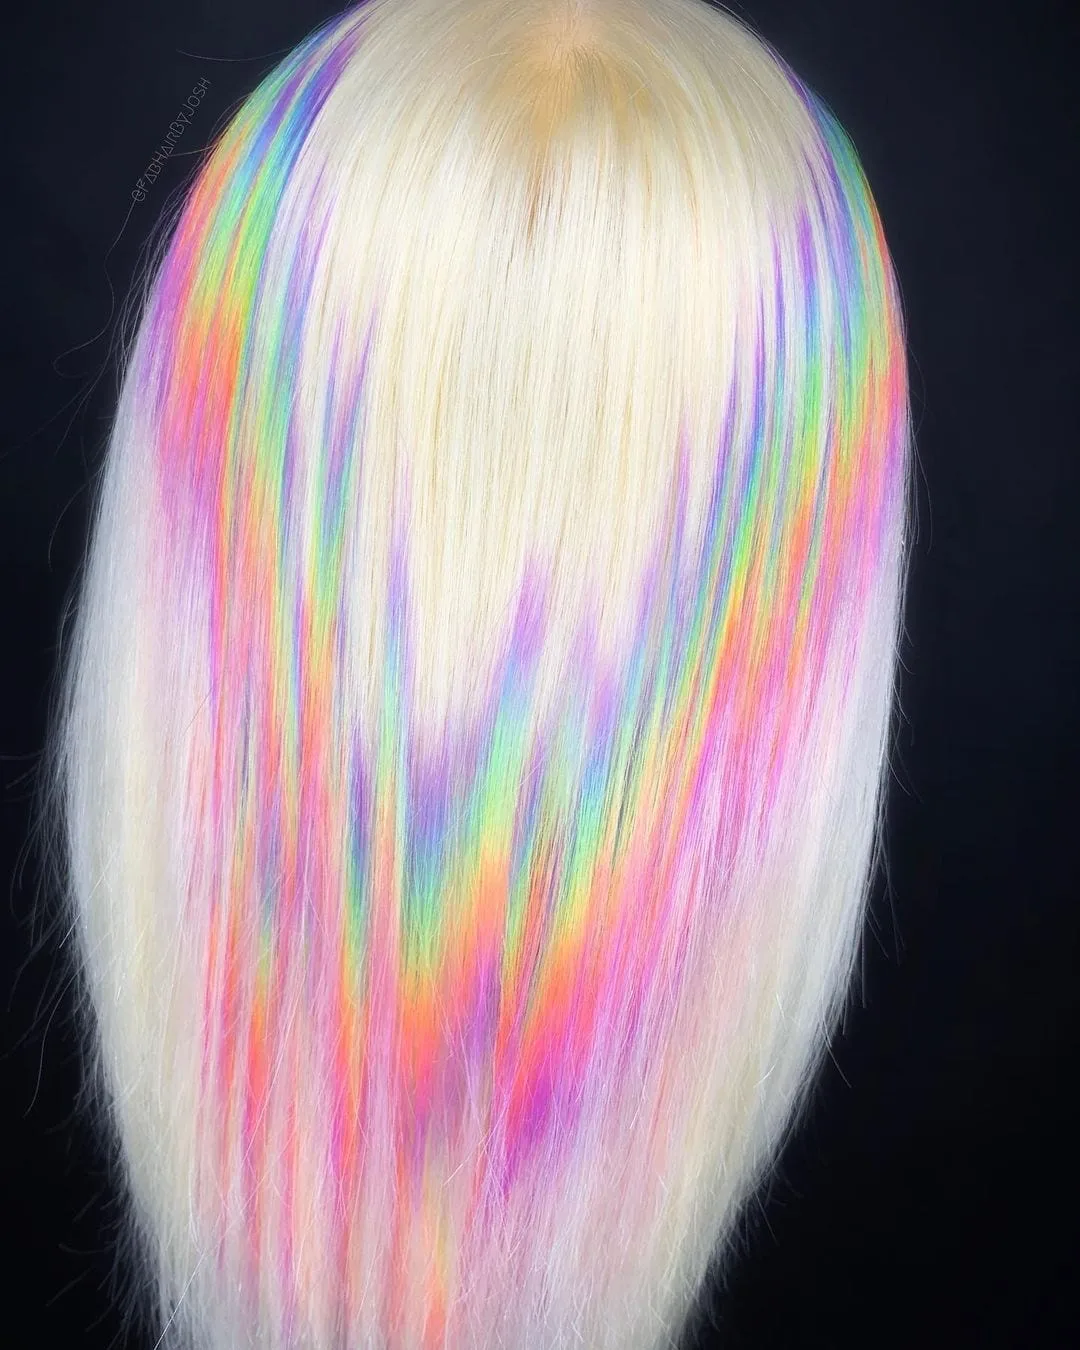 Jagged rainbow holographic hair on a blonde woman standing in a studio facing the black wall